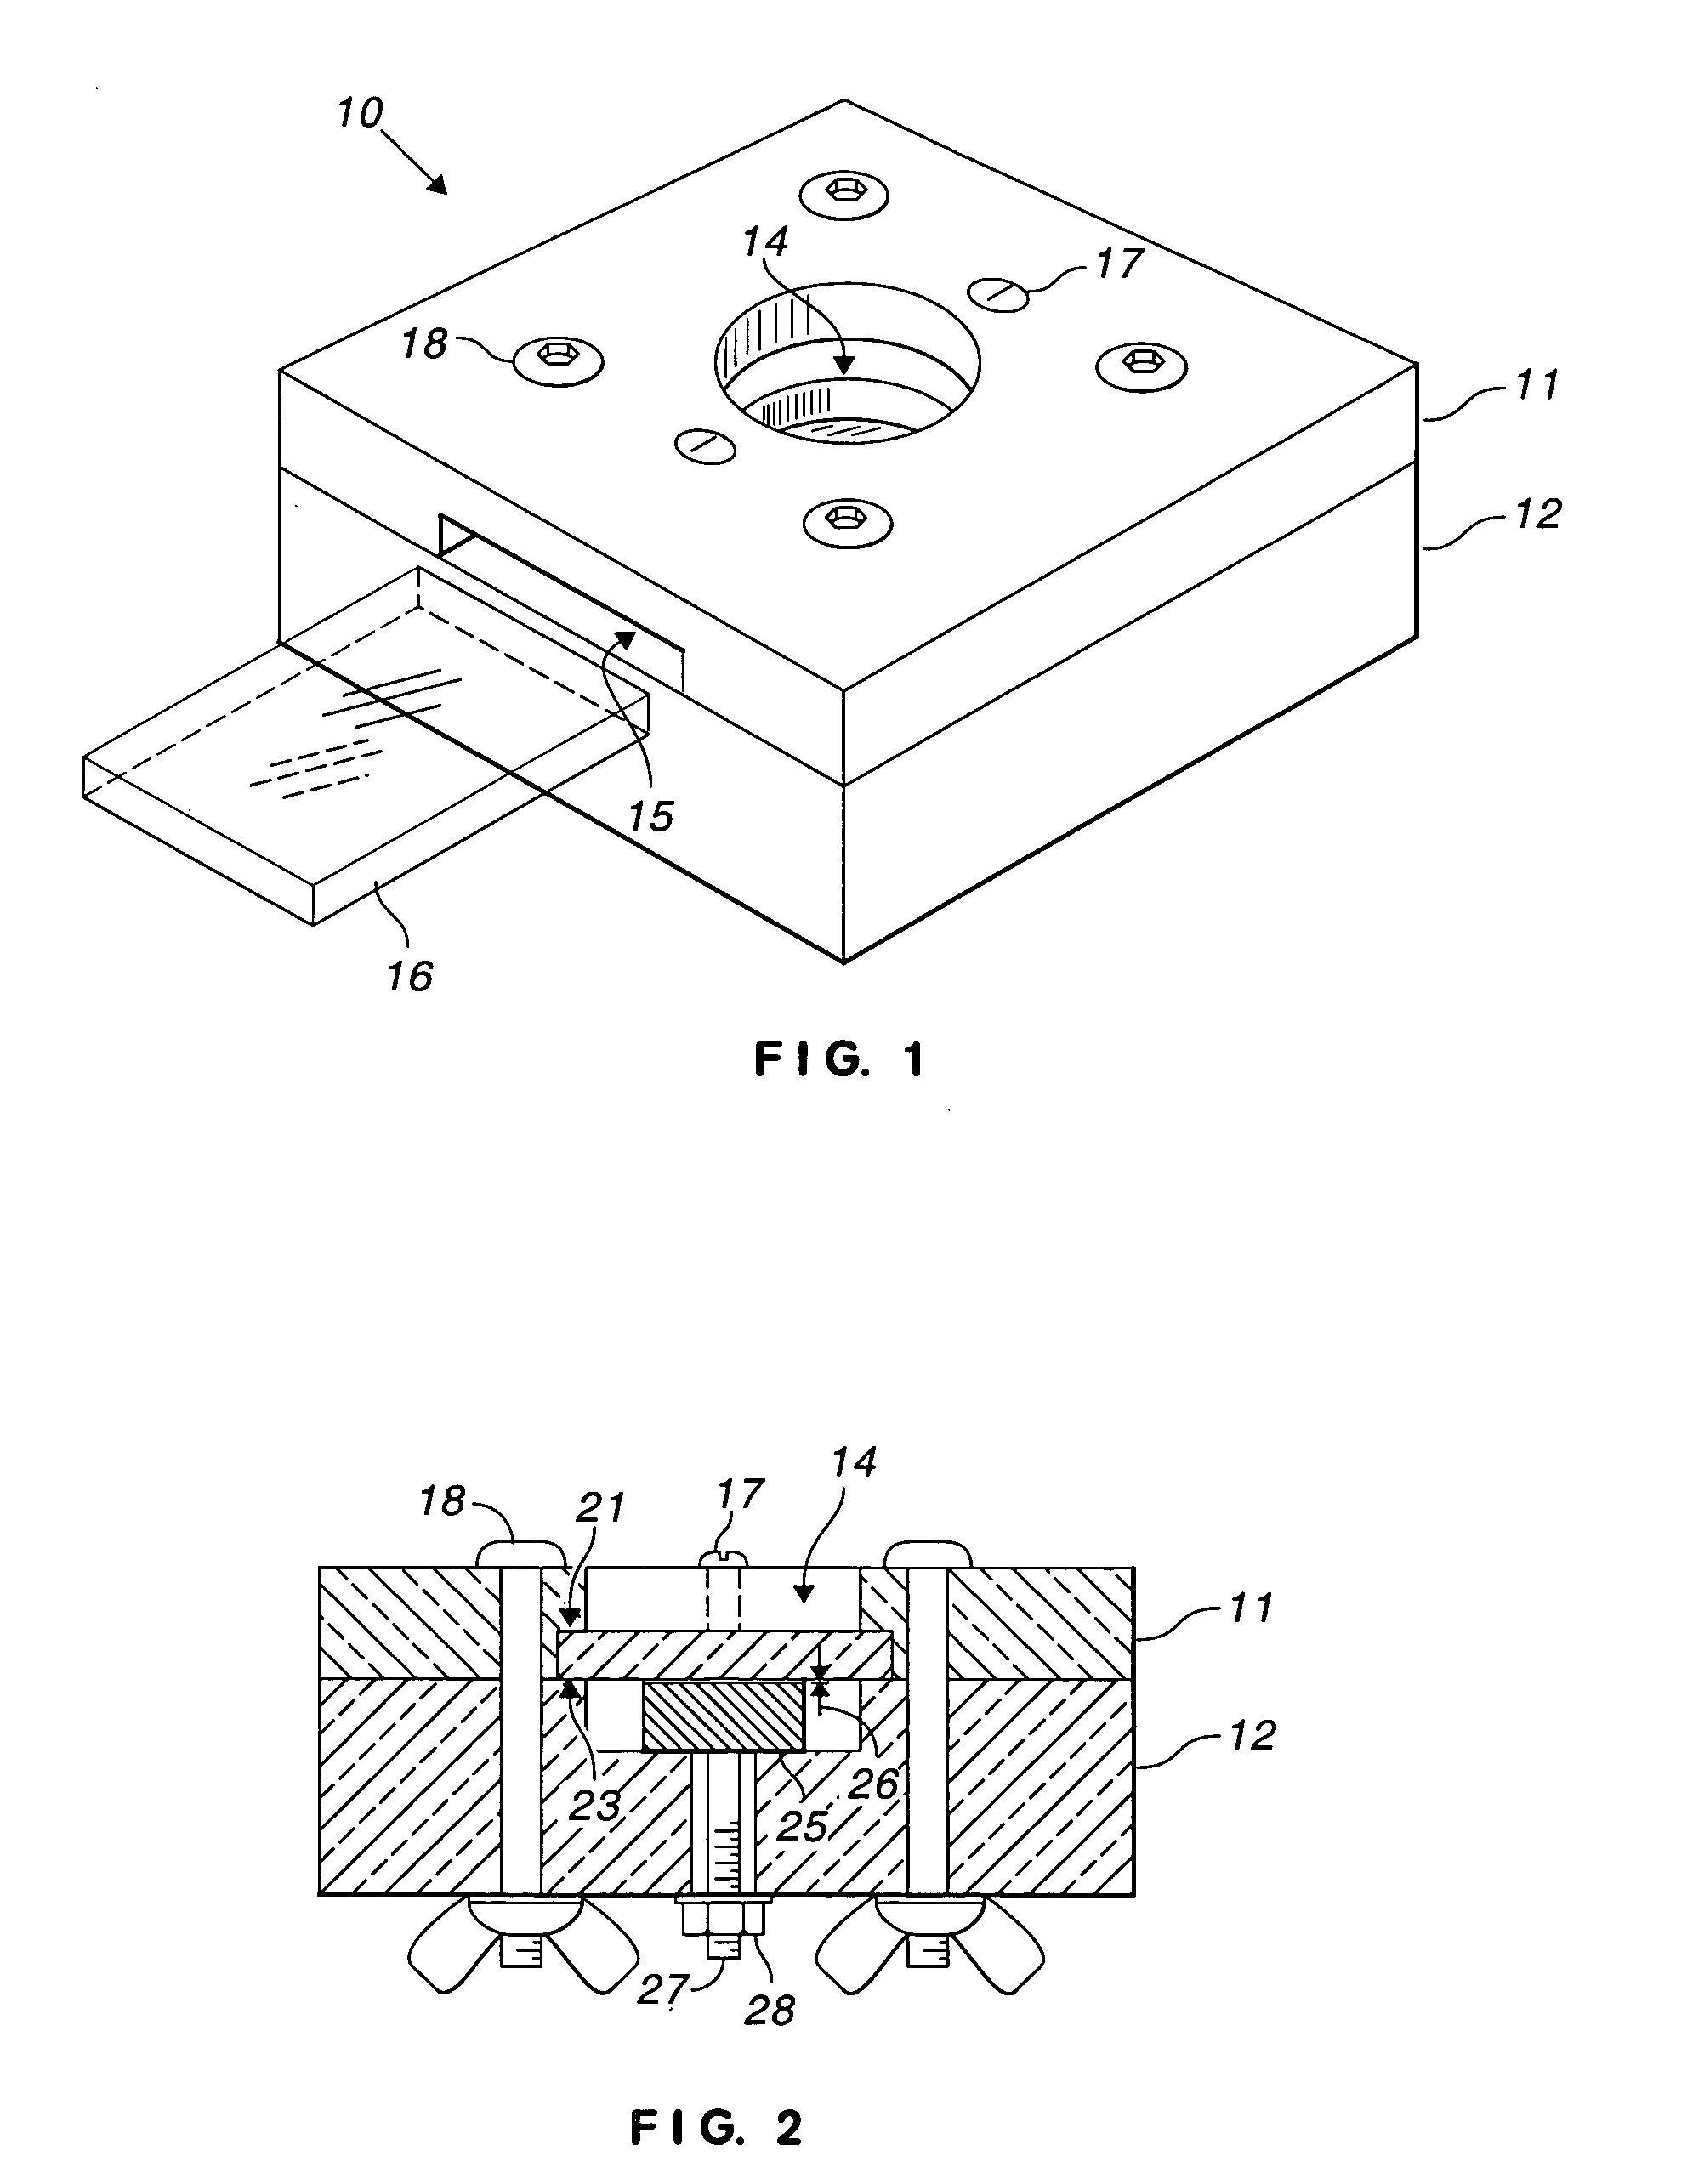 Test cell for evaluating phosphor